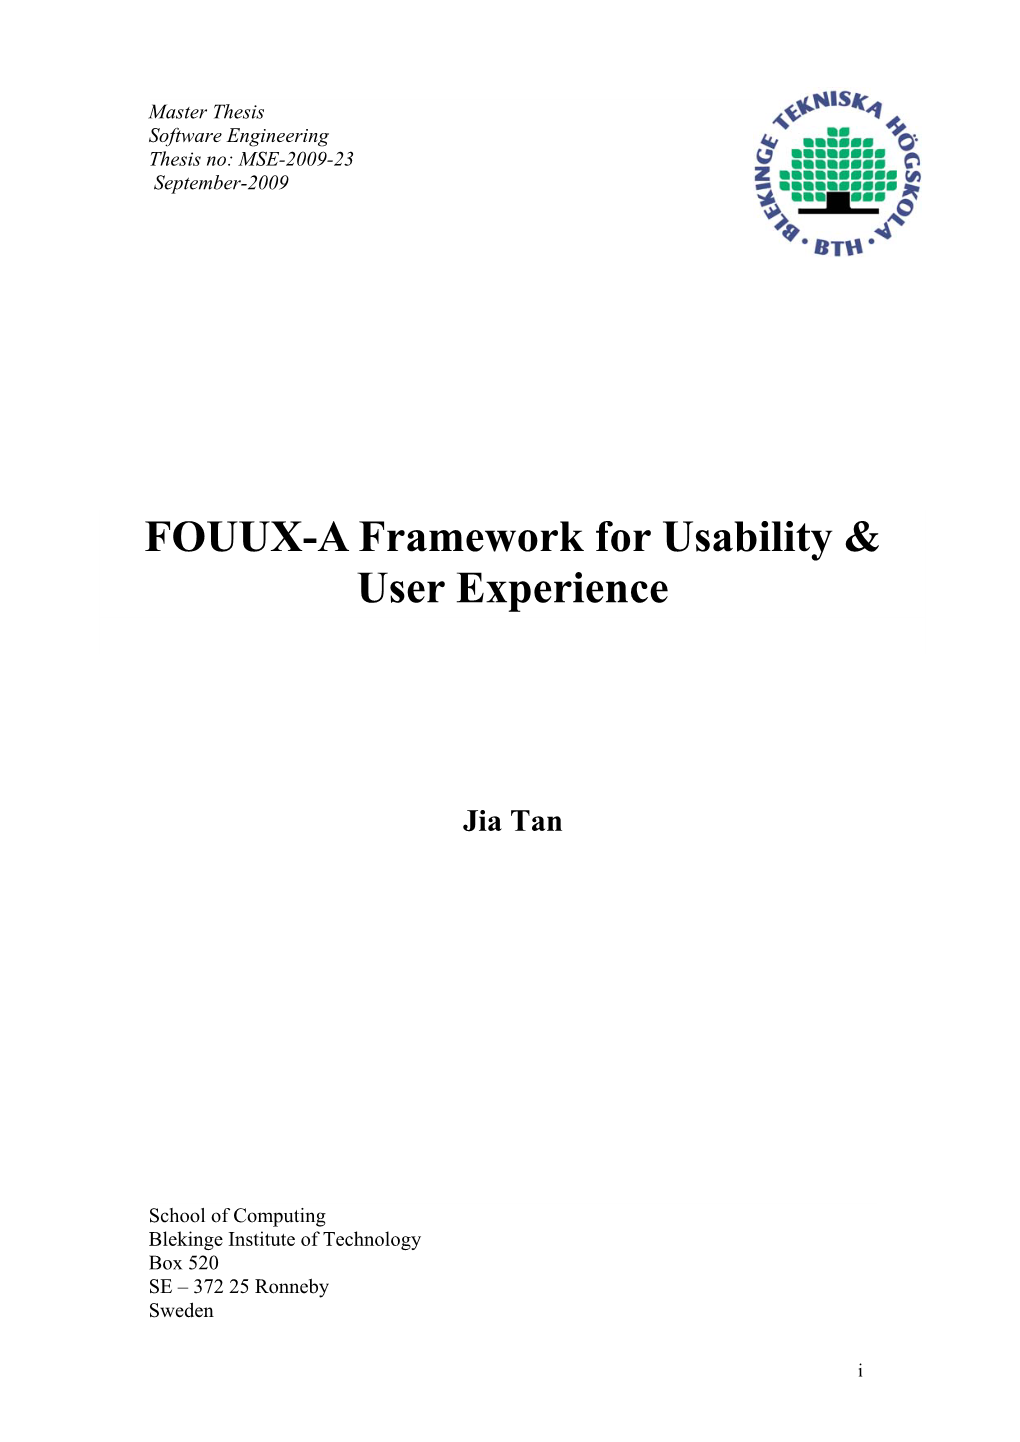 FOUUX-A Framework for Usability & User Experience